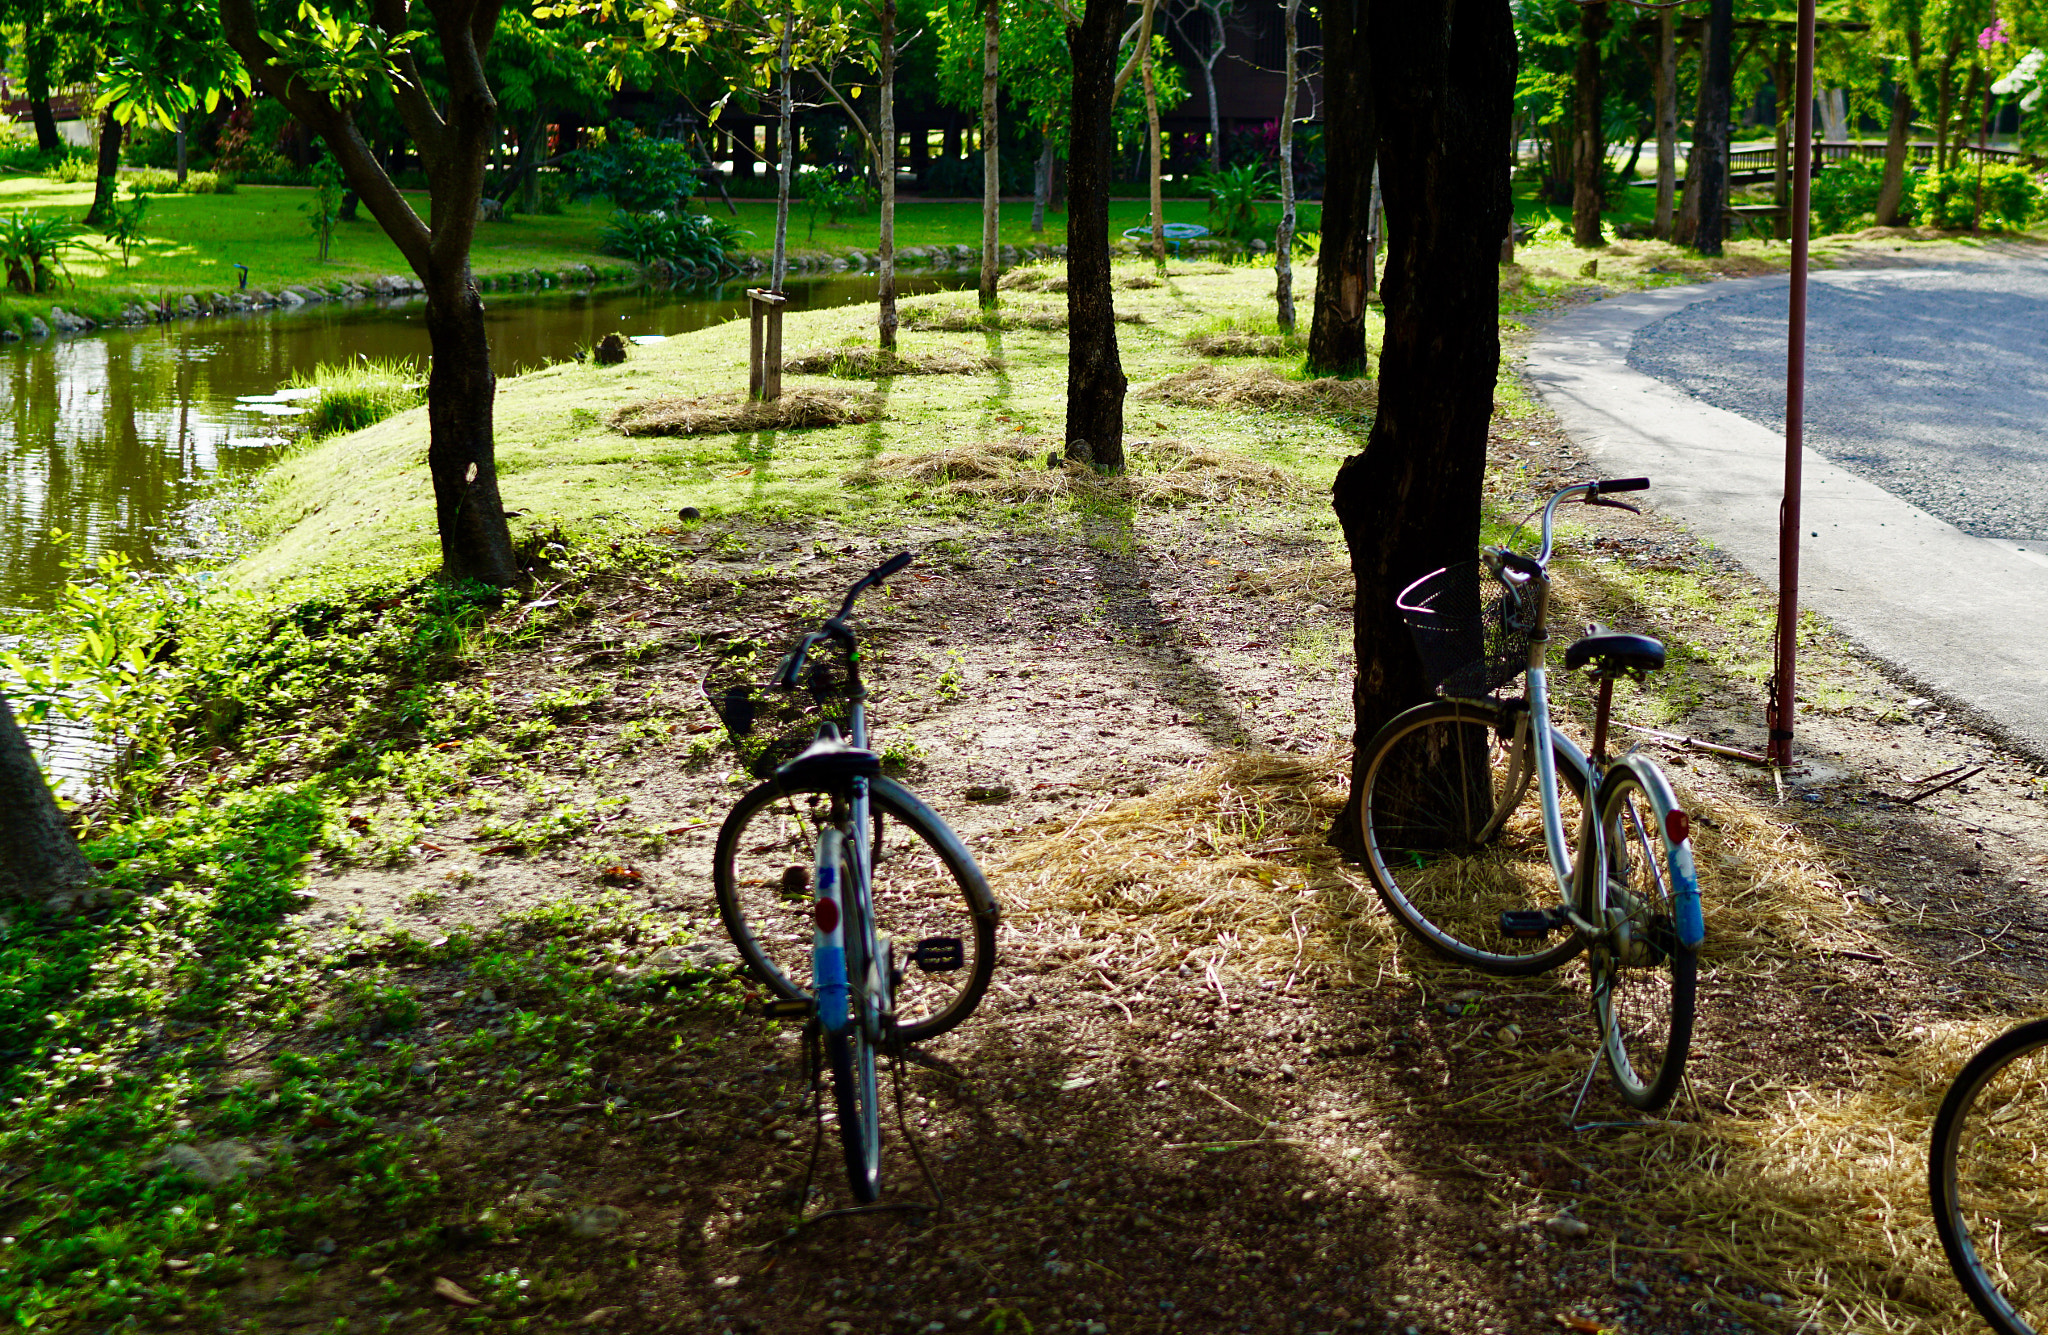 Sony a5100 sample photo. Bicycles in garden park photography